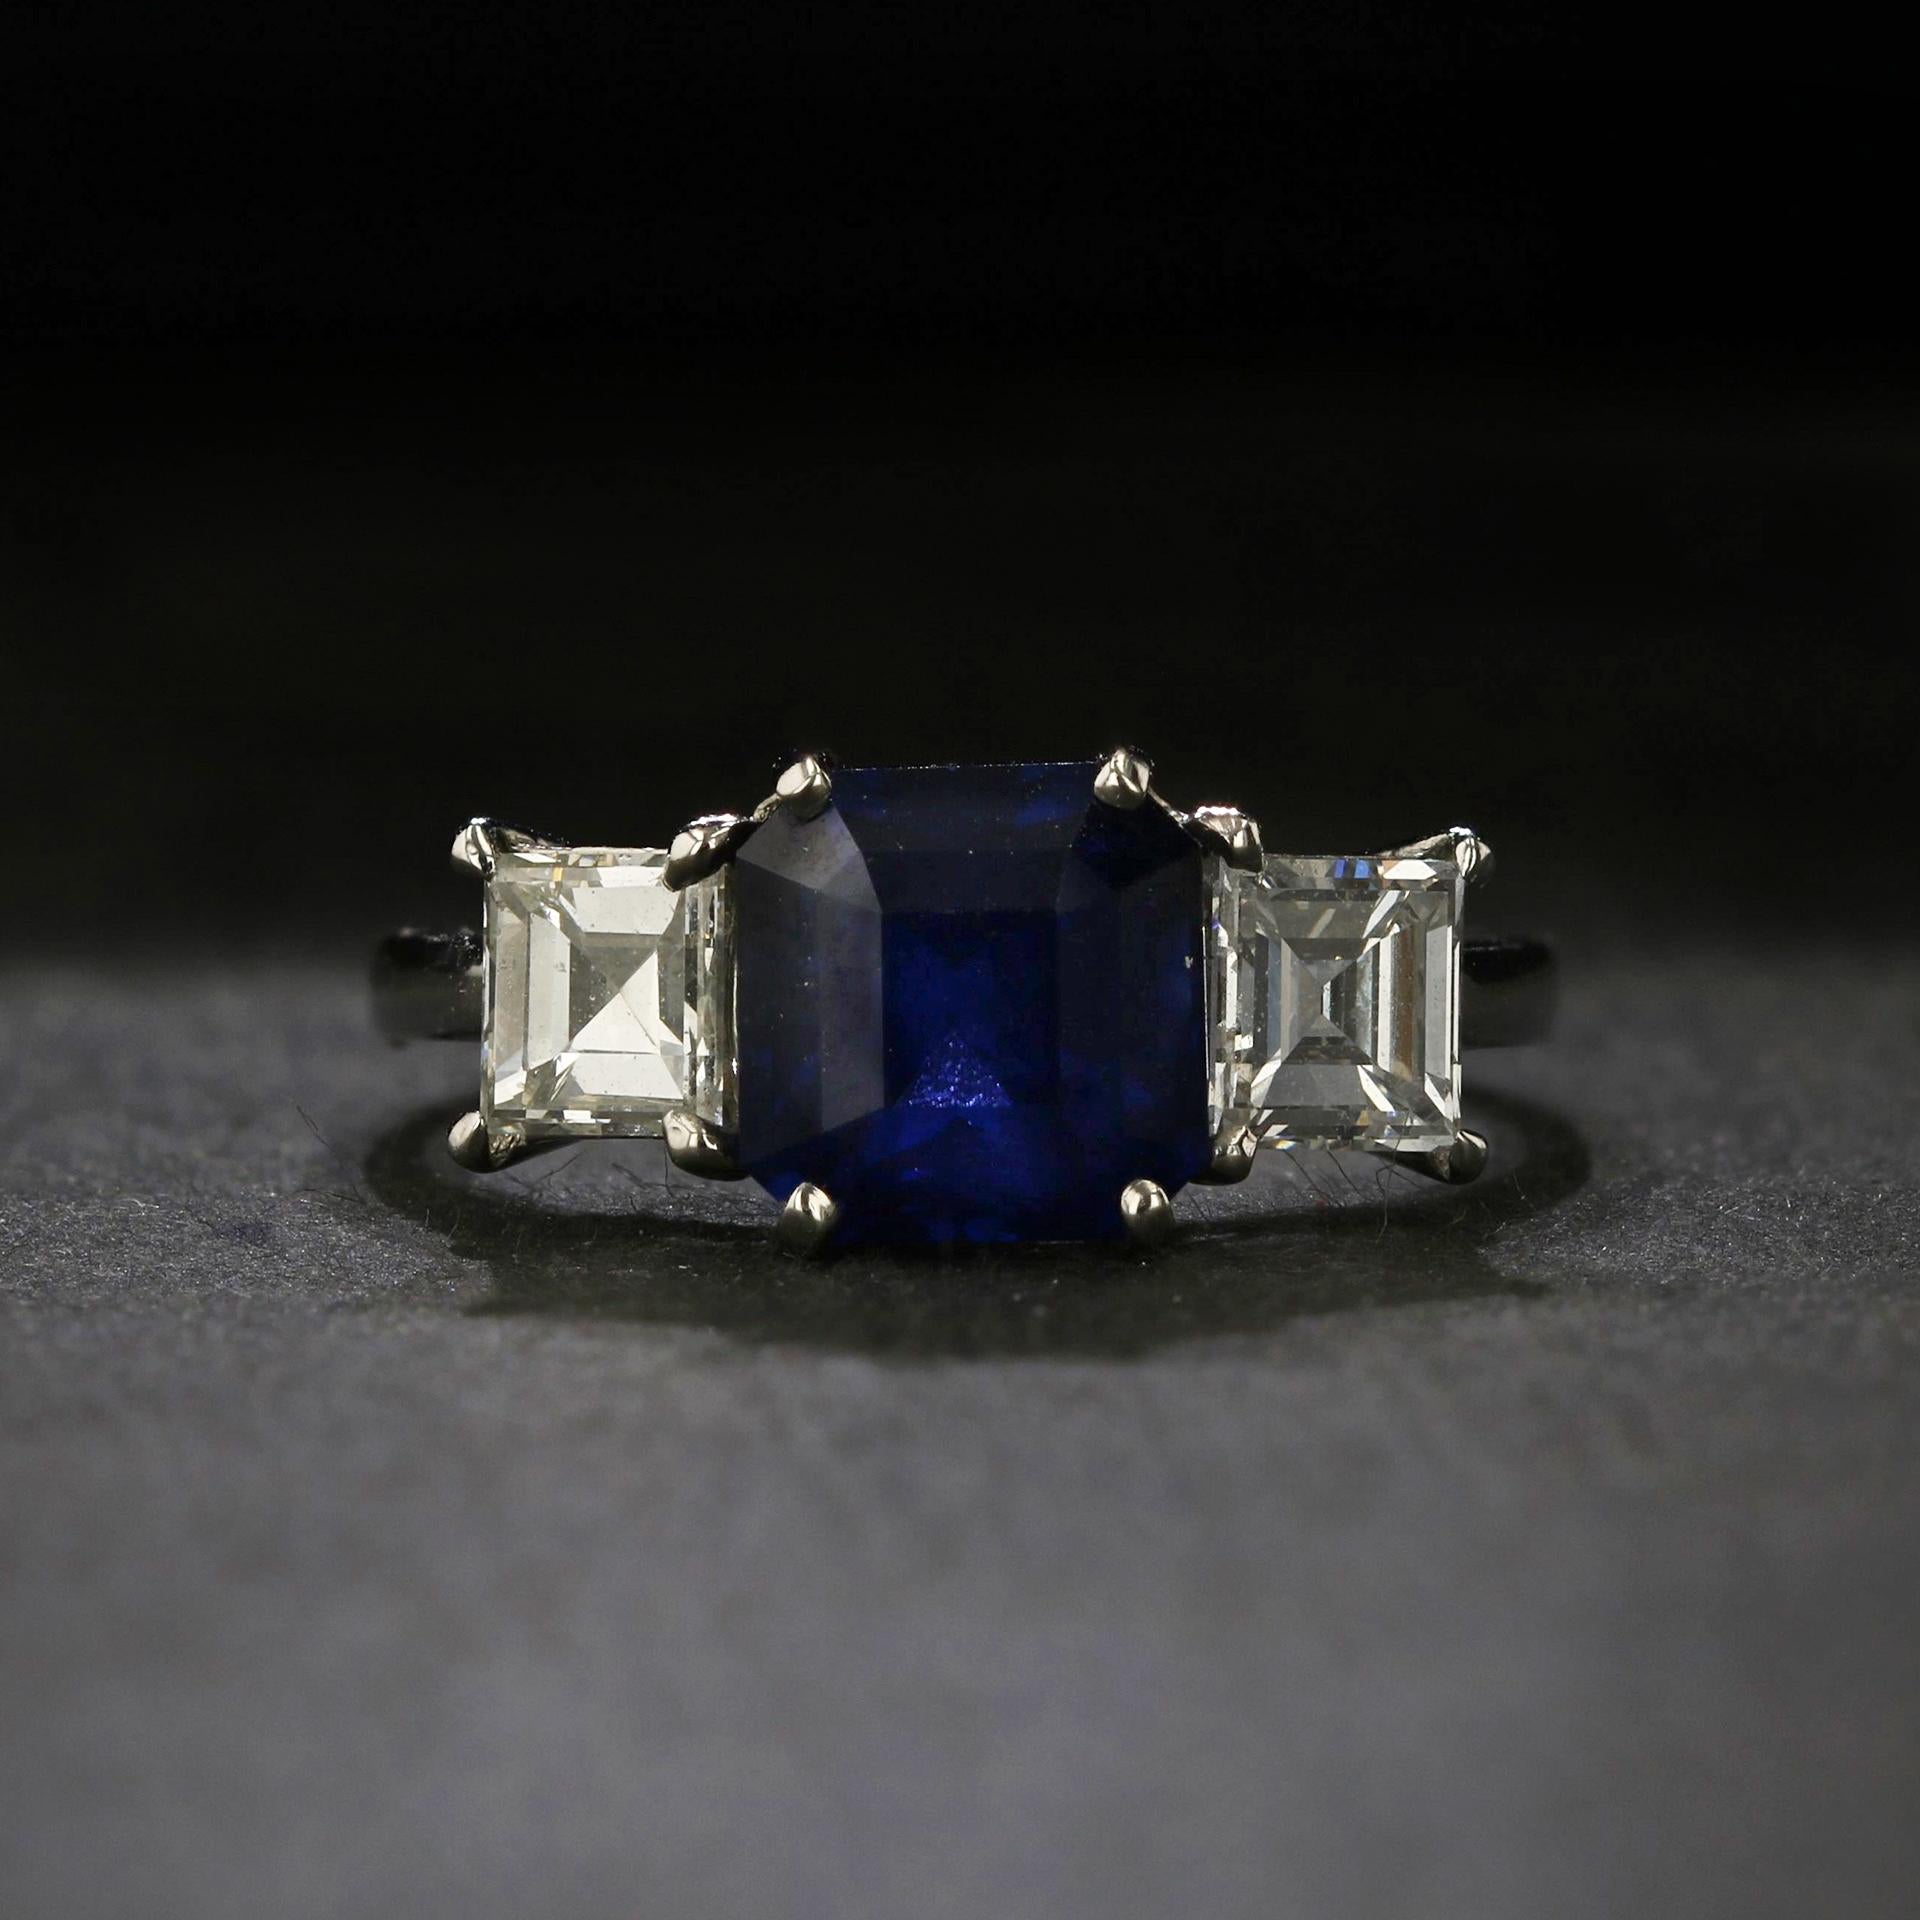 The rich royal blue of this Ceylon sapphire flashes its facets in a stunning Asscher cut, weighing a generous 3.31 carats. It is accompanied by two bright white square emerald-cut diamonds and set in gleaming platinum. The pair of diamonds together